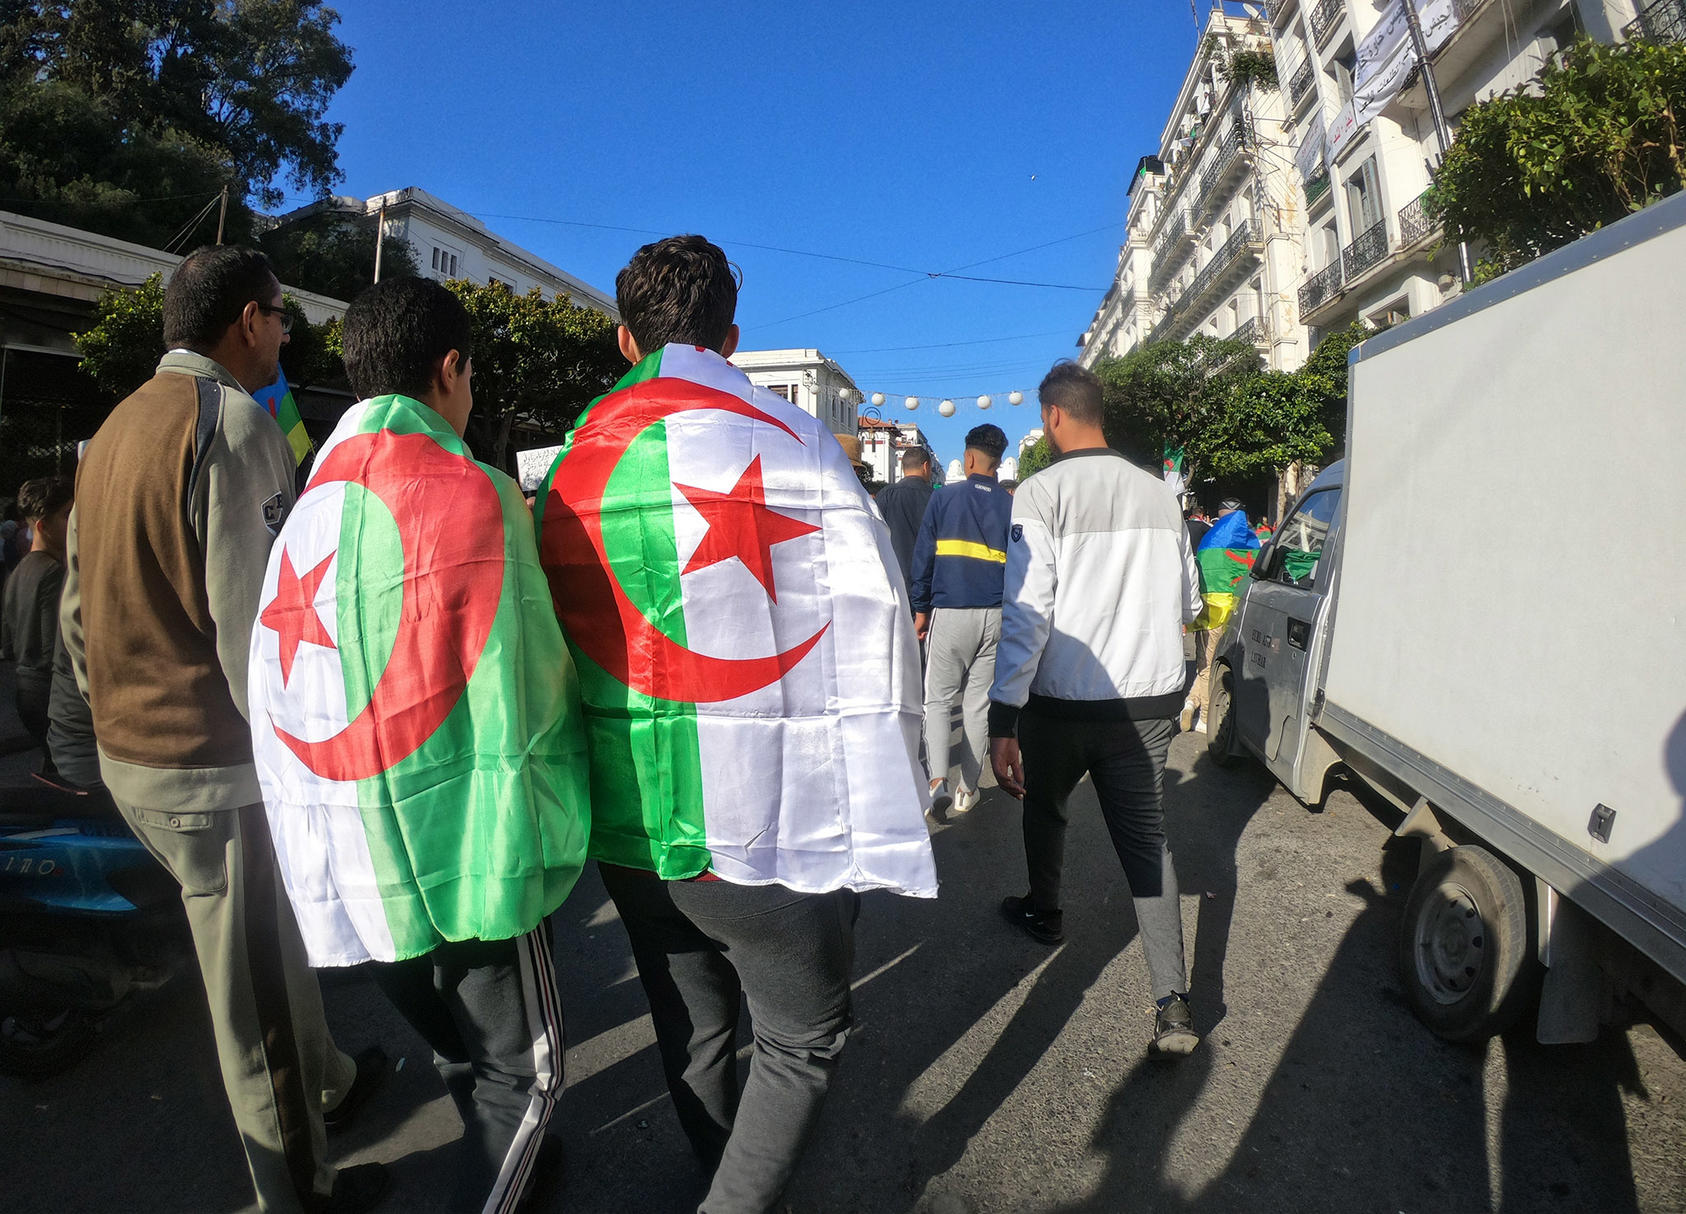 Algeria’s months-long protests have led to the resignation of longtime dictator Bouteflika in April and, over this past weekend, the cancellation of elections scheduled for July 4. (Abdelfatah Cezayirli)